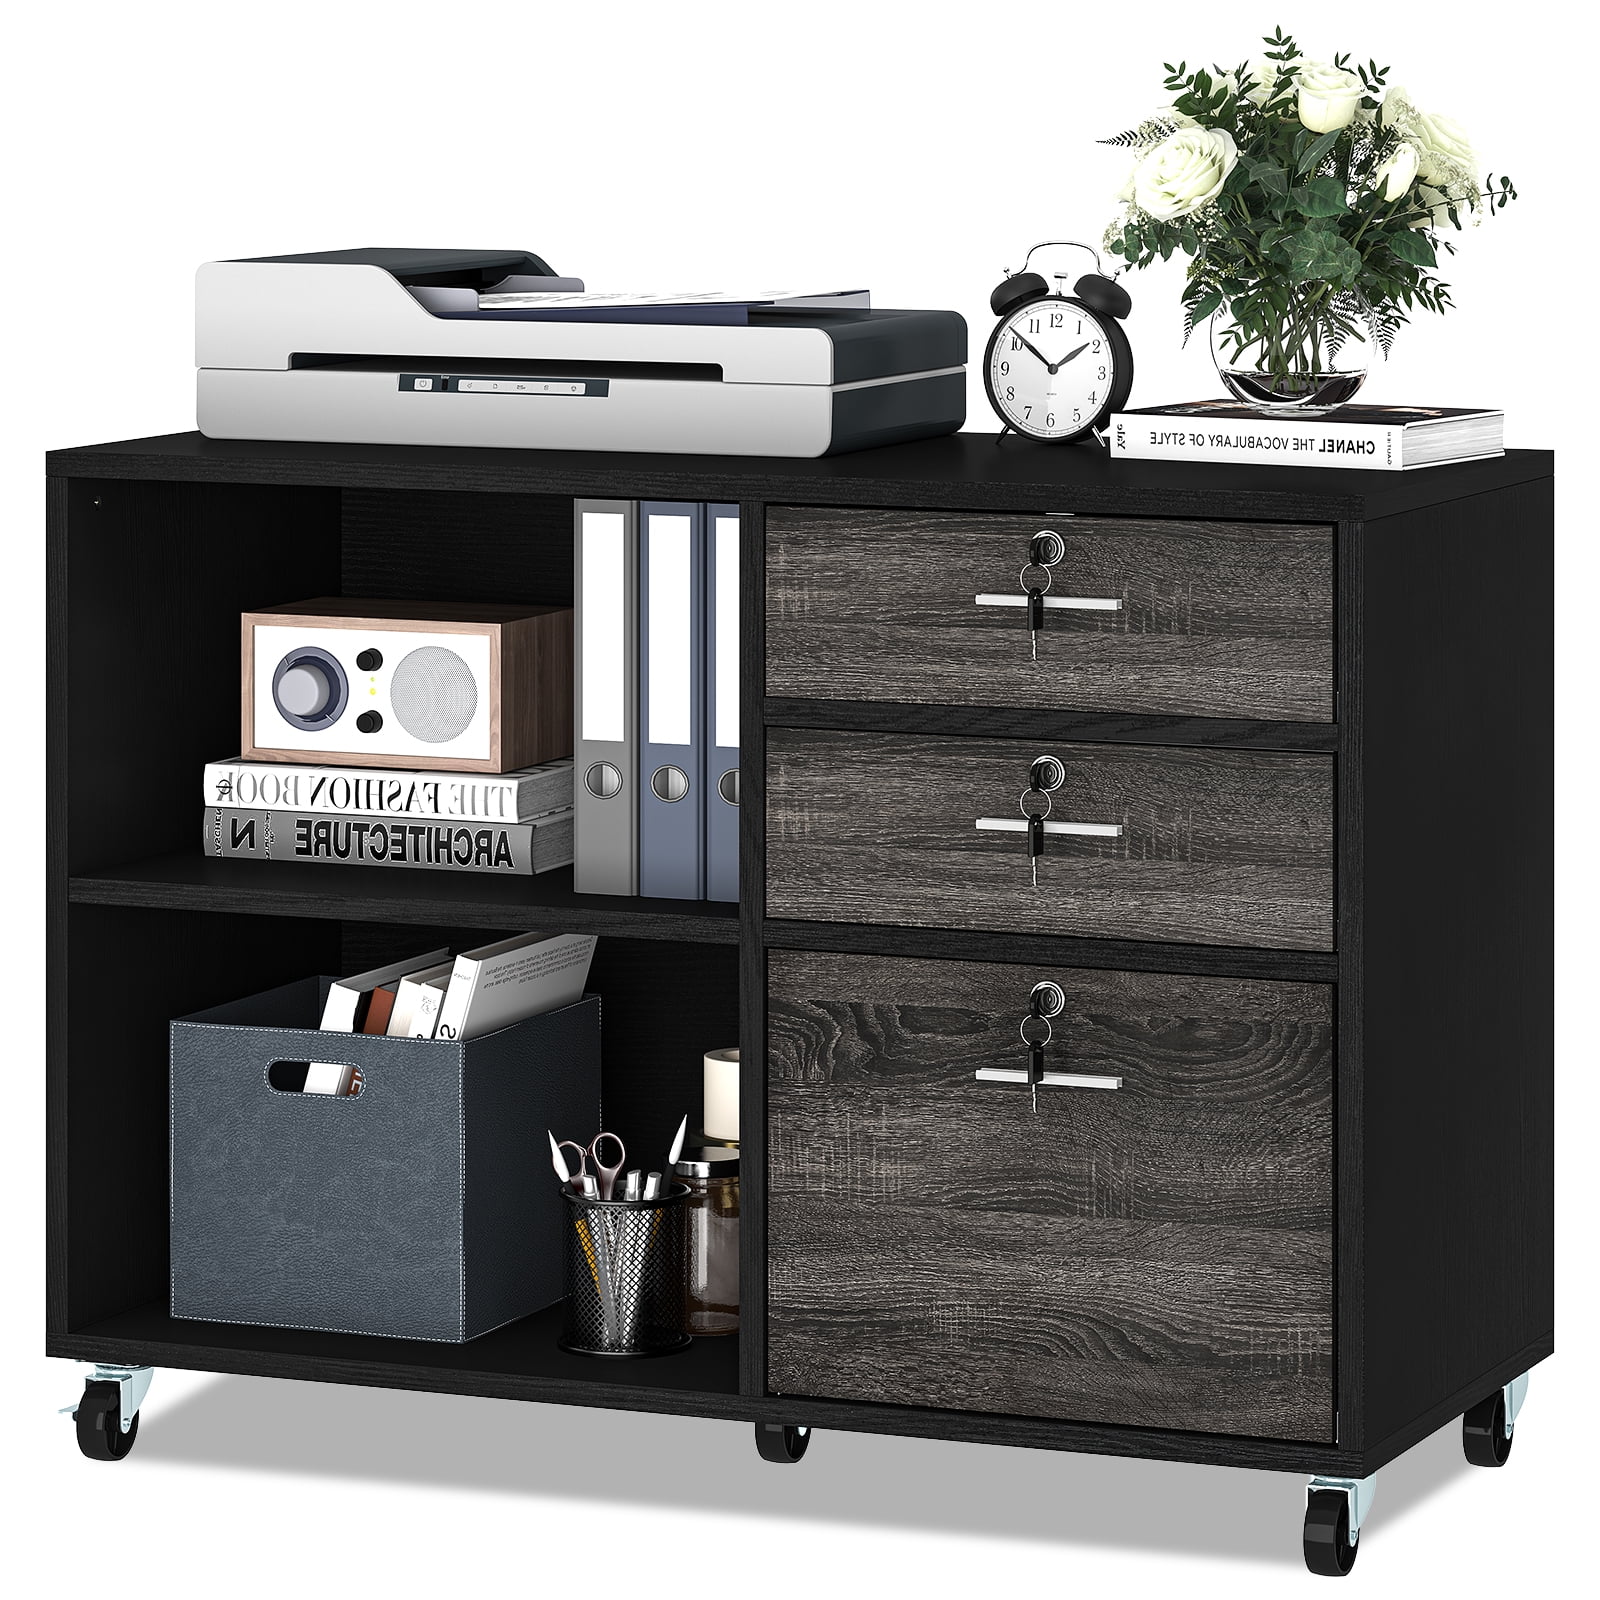 YITAHOME Rolling File Cabinet Storage W/ Drawer Organizer Rolling Home Office 